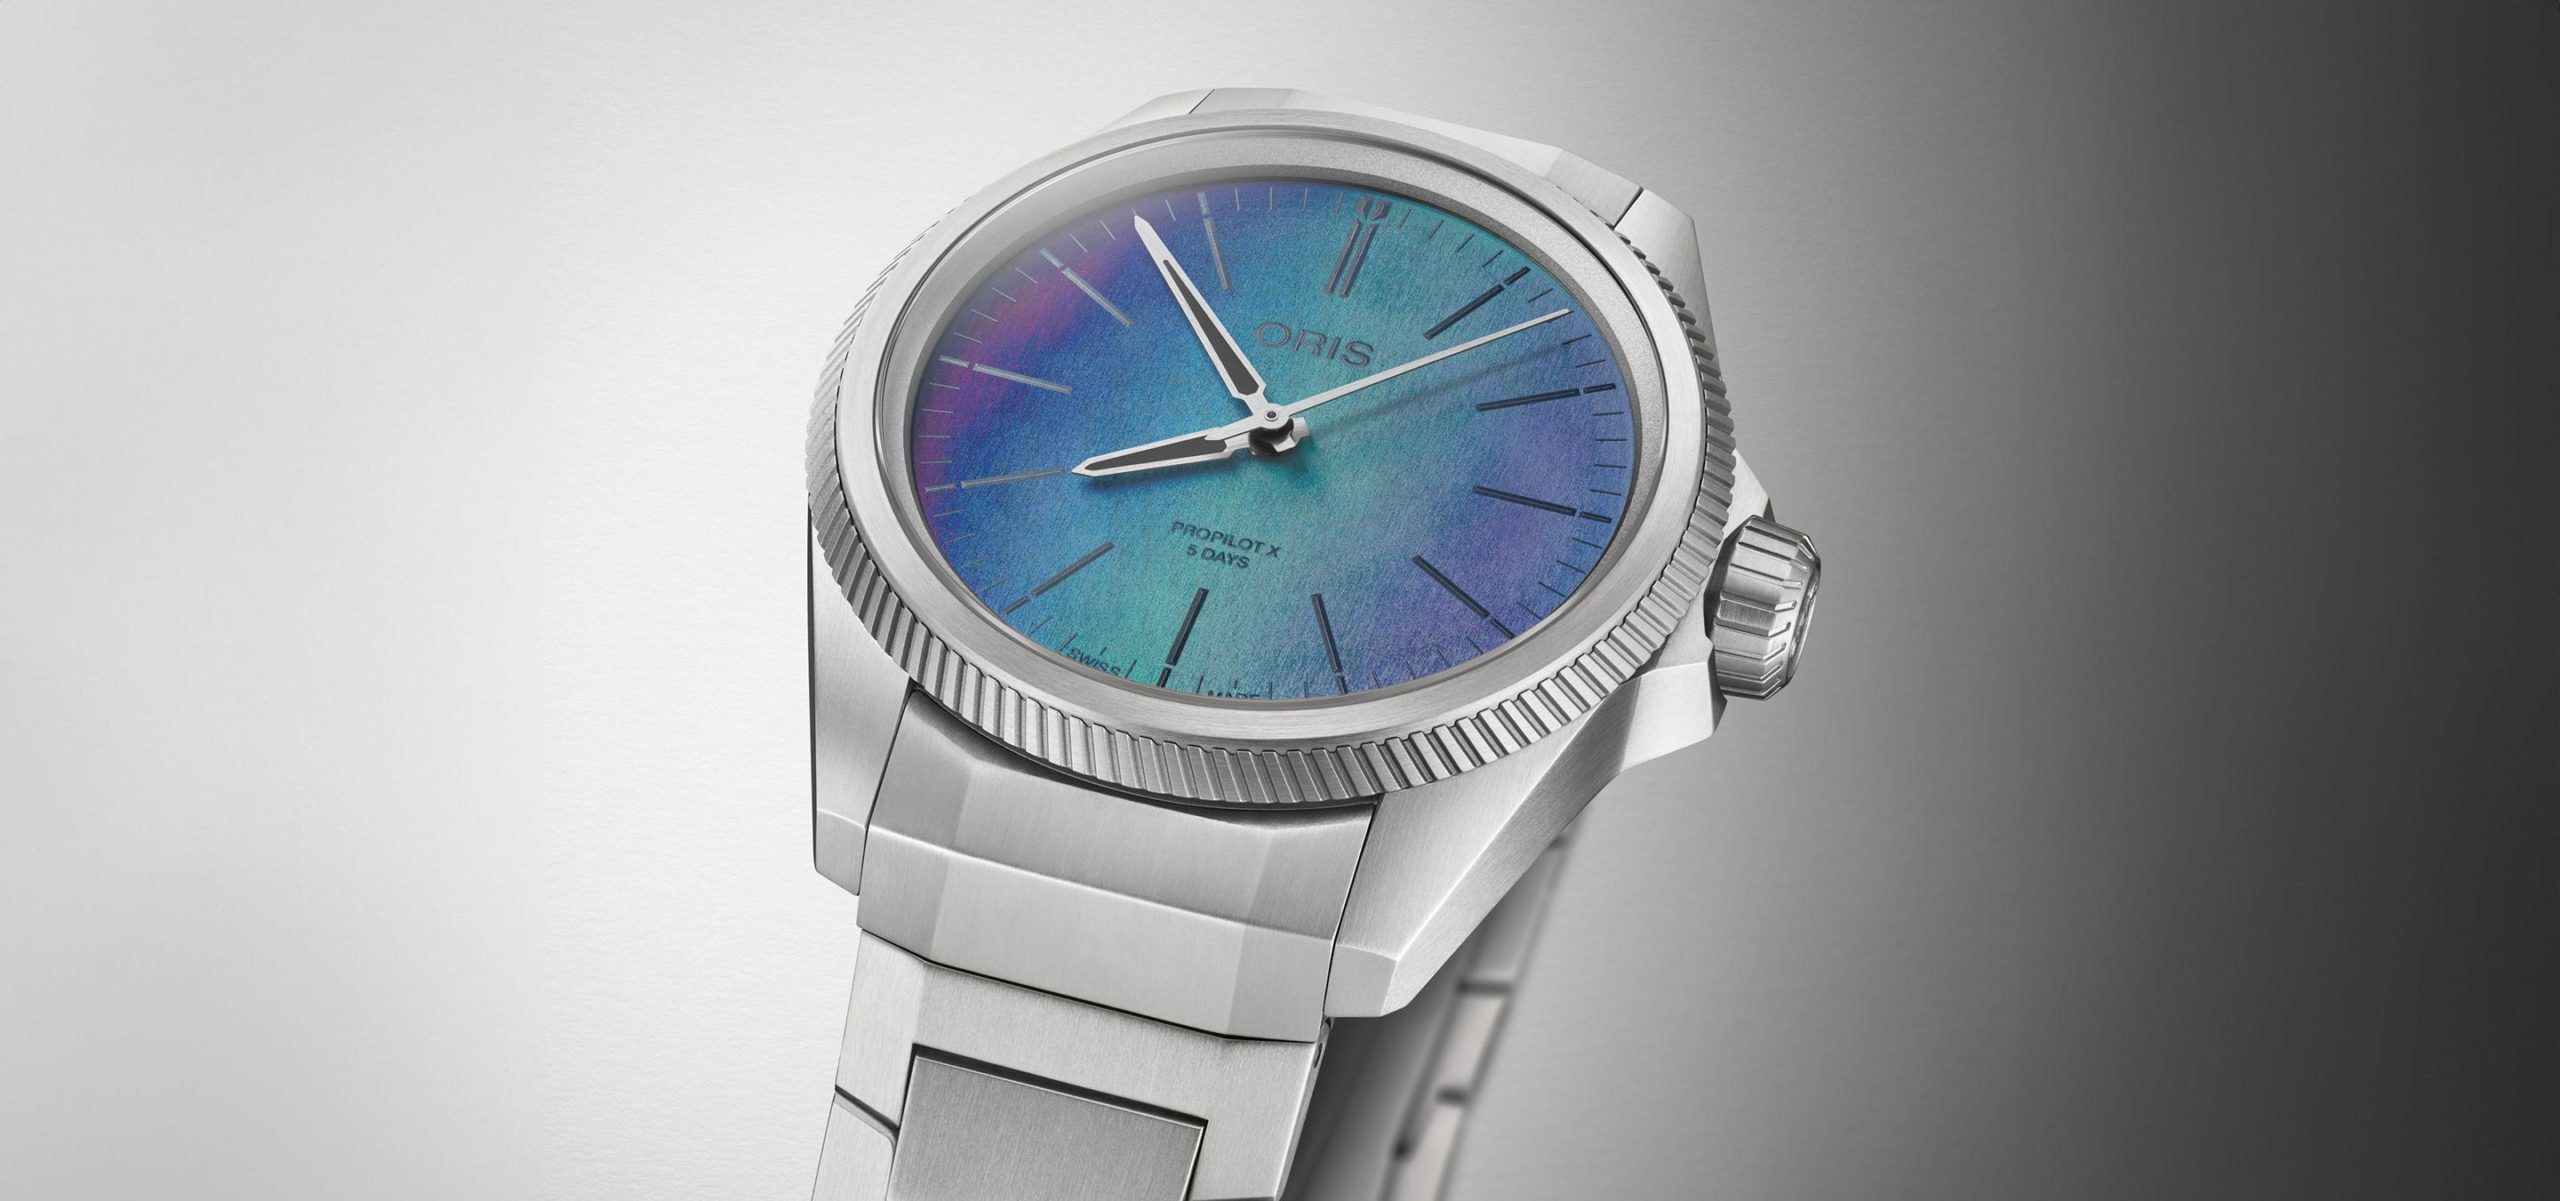 Multiple Colours, Multiple Ways: Oris’s Watch Faces Presenting Colourful Displays